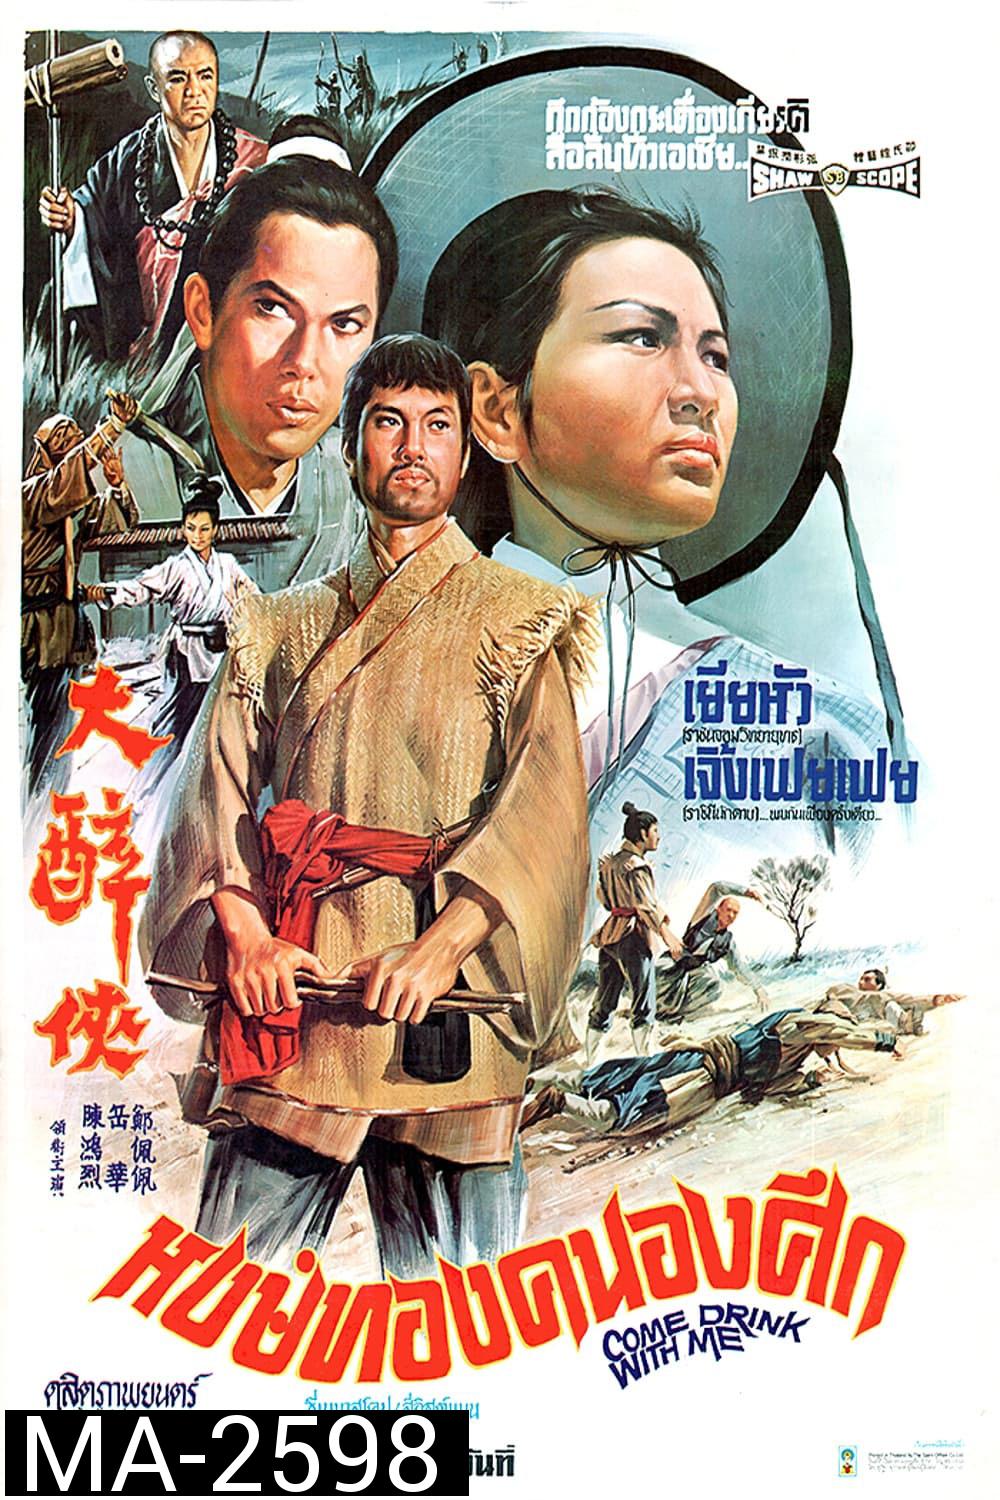 Come Drink with Me (1966) หงษ์ทองคะนองศึก